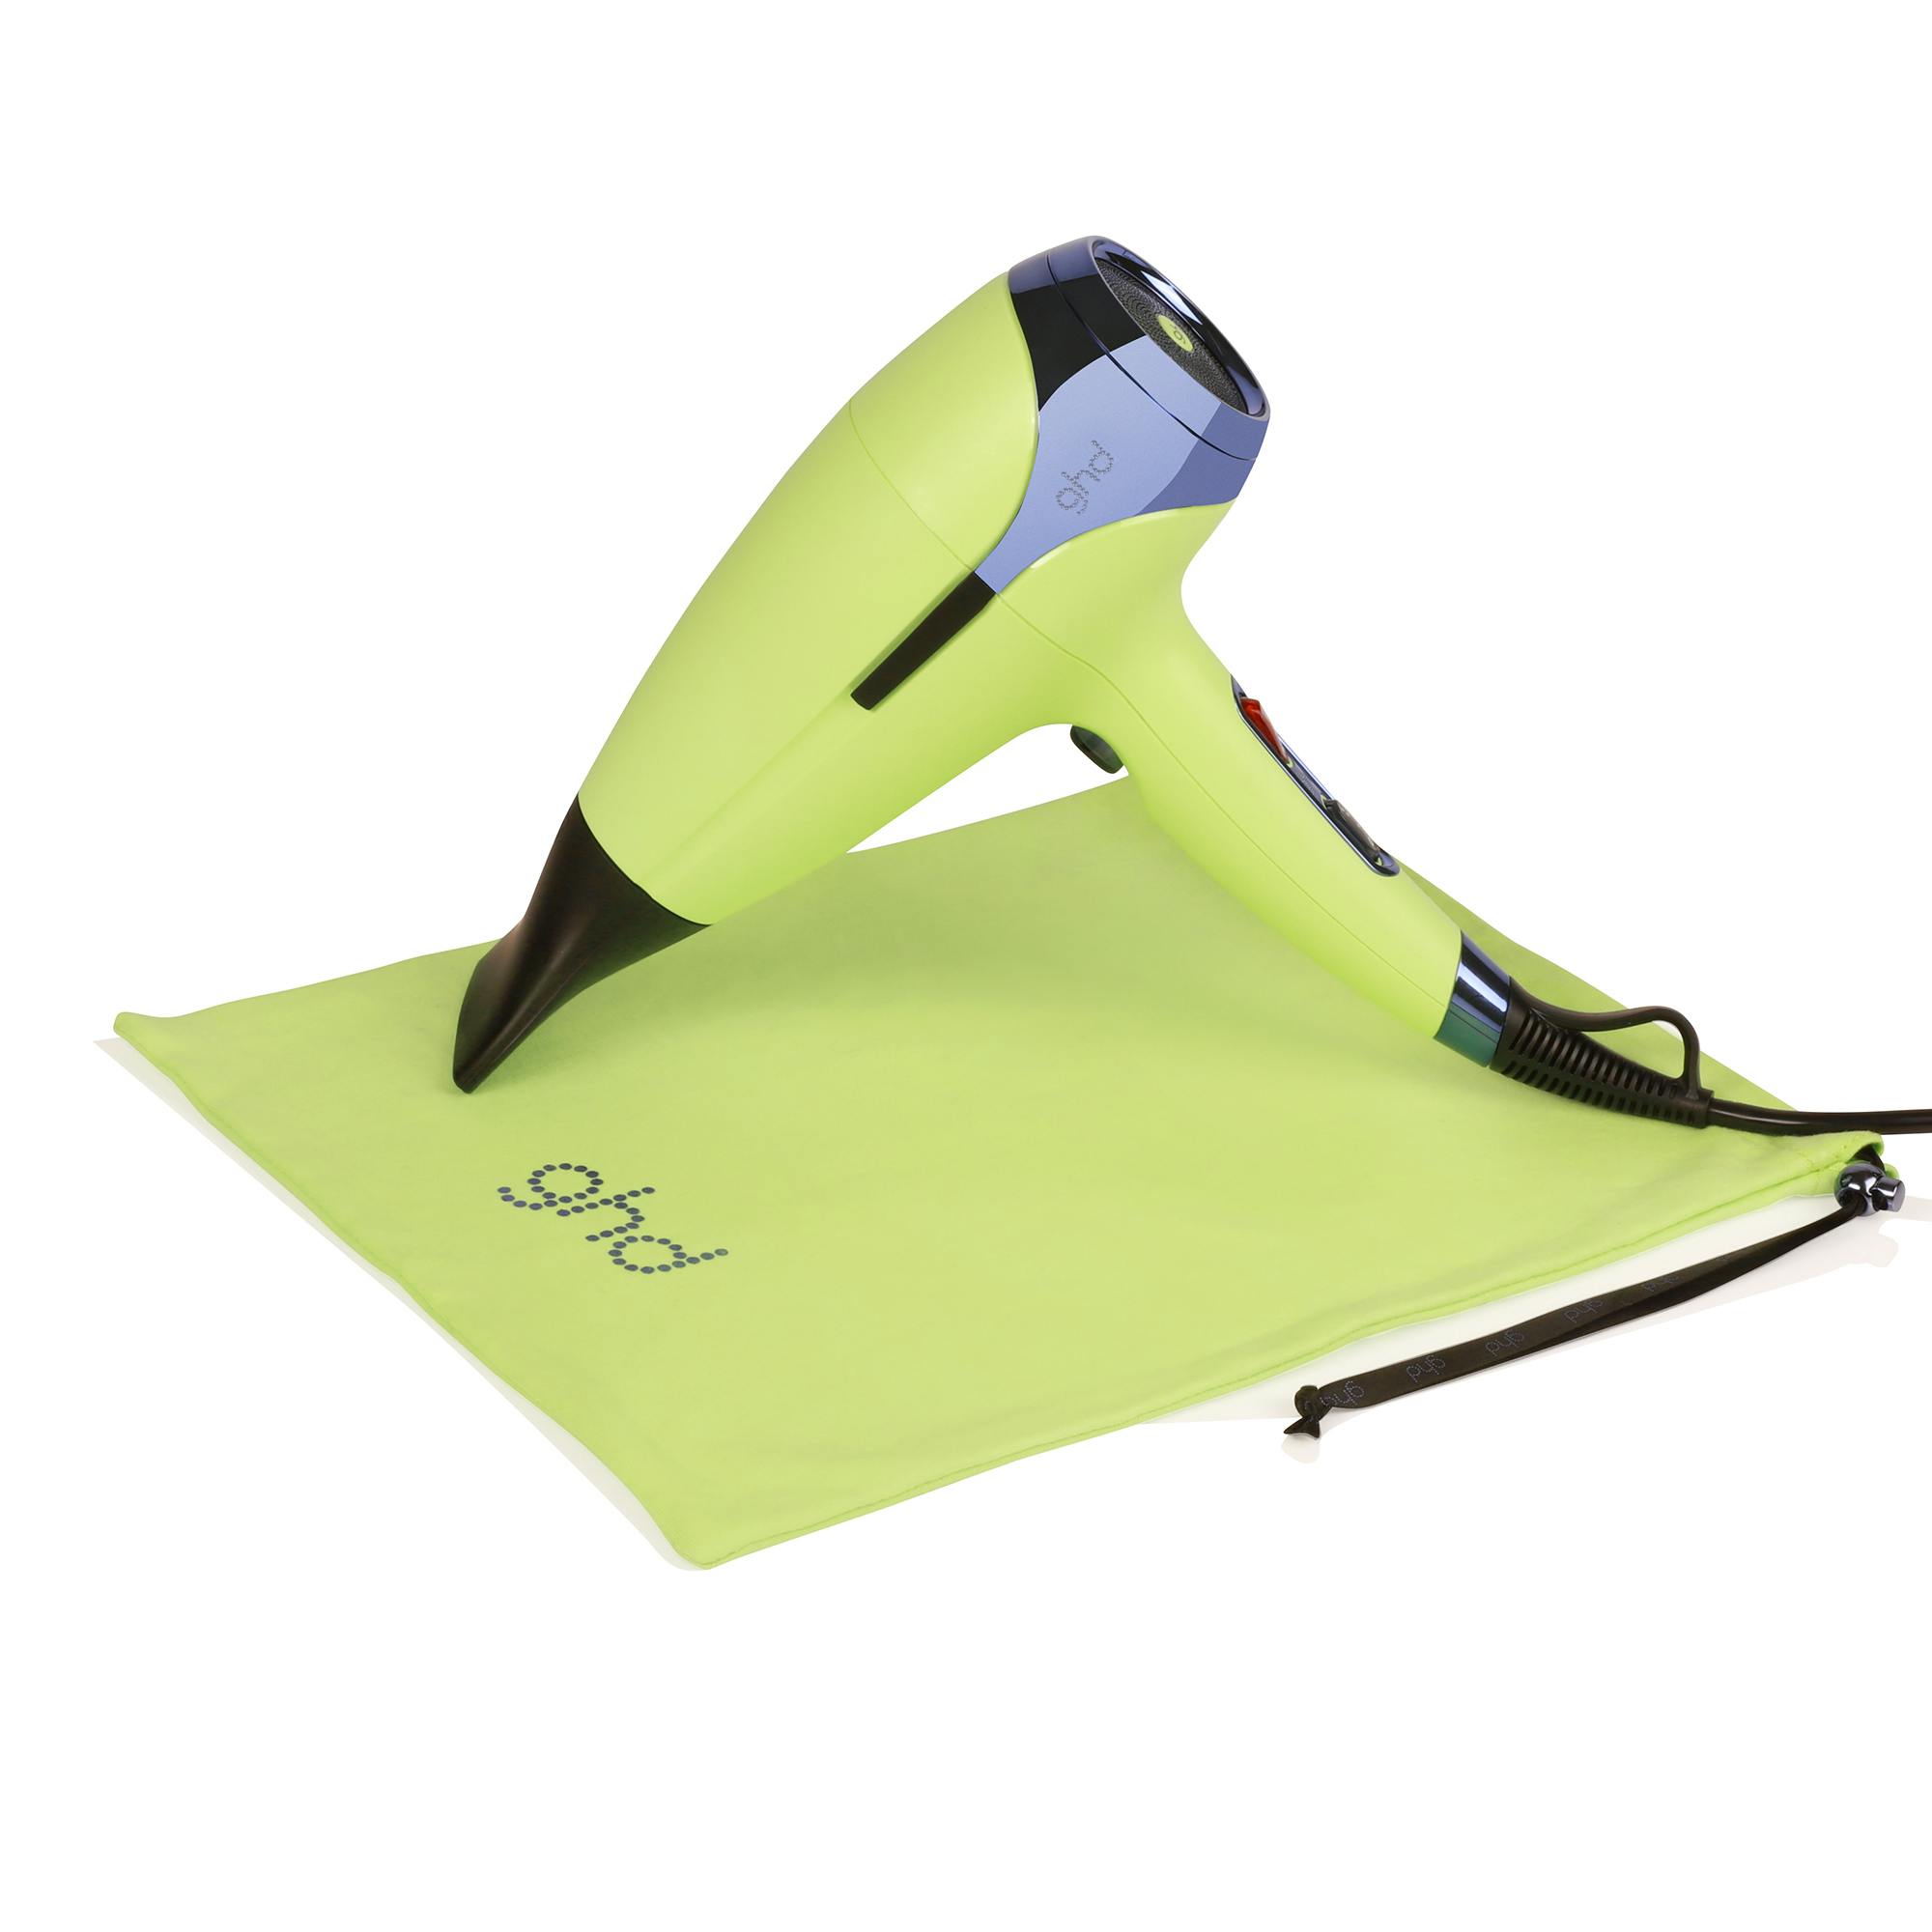 GHD Helios Hair Dryer in Cyber Lime 1 st